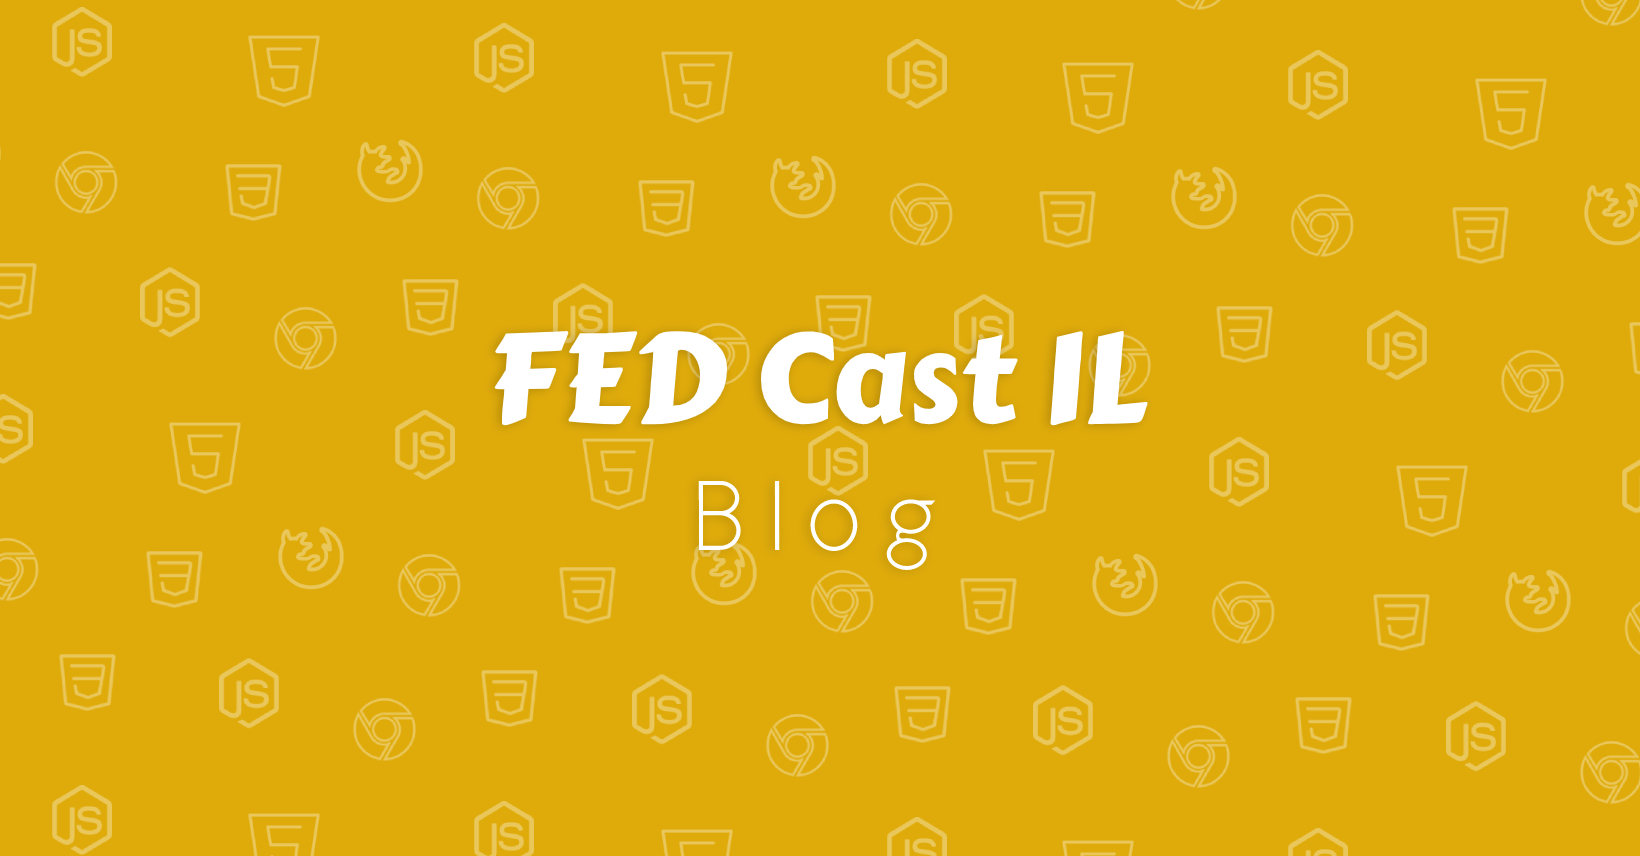 fedcast.co.il